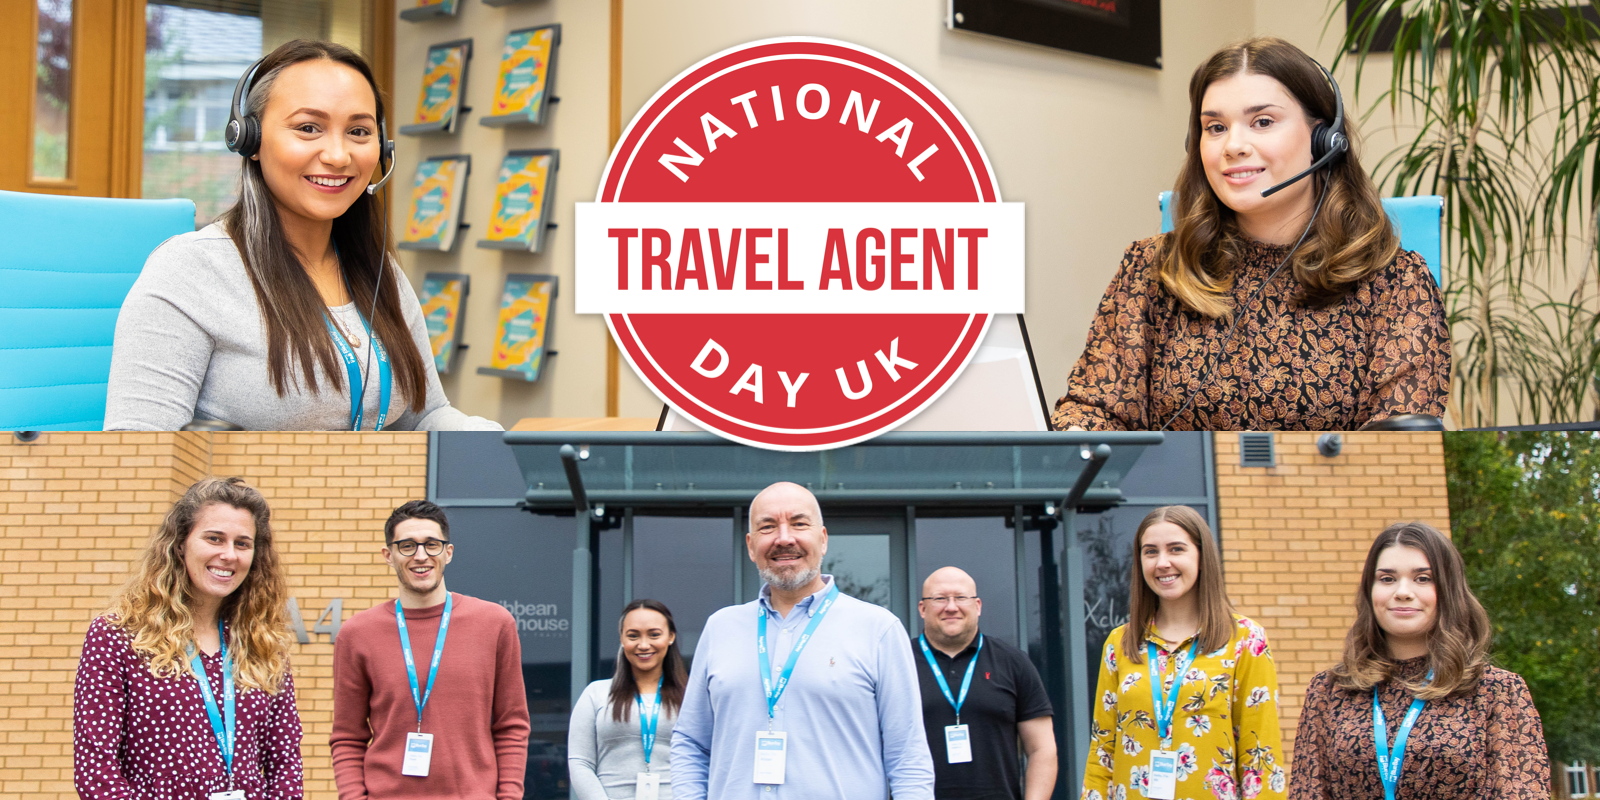 National-Travel-Agent-Day-UK-1600x800